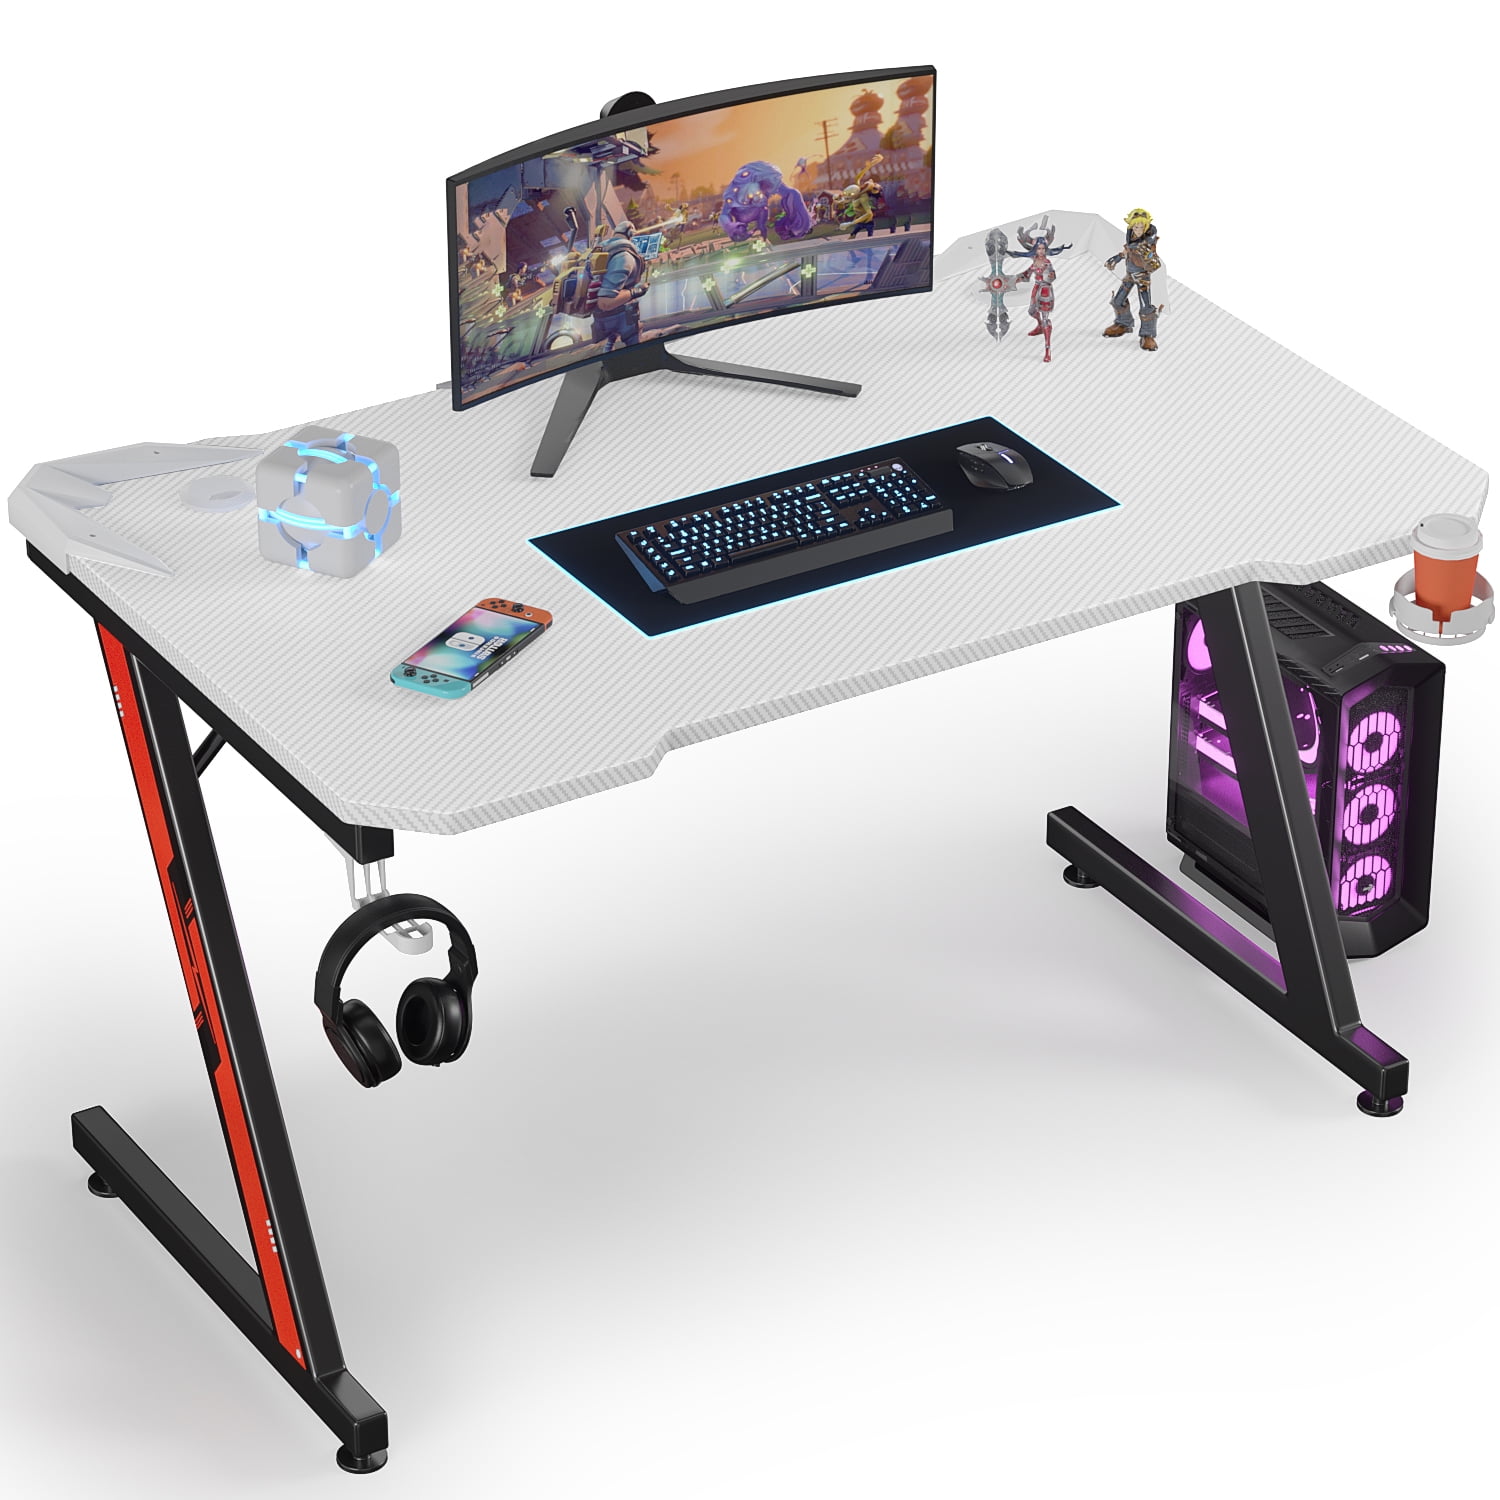 Tomaz - LARGE SURFACE AREA The Tomaz Armor Gaming Desk will have